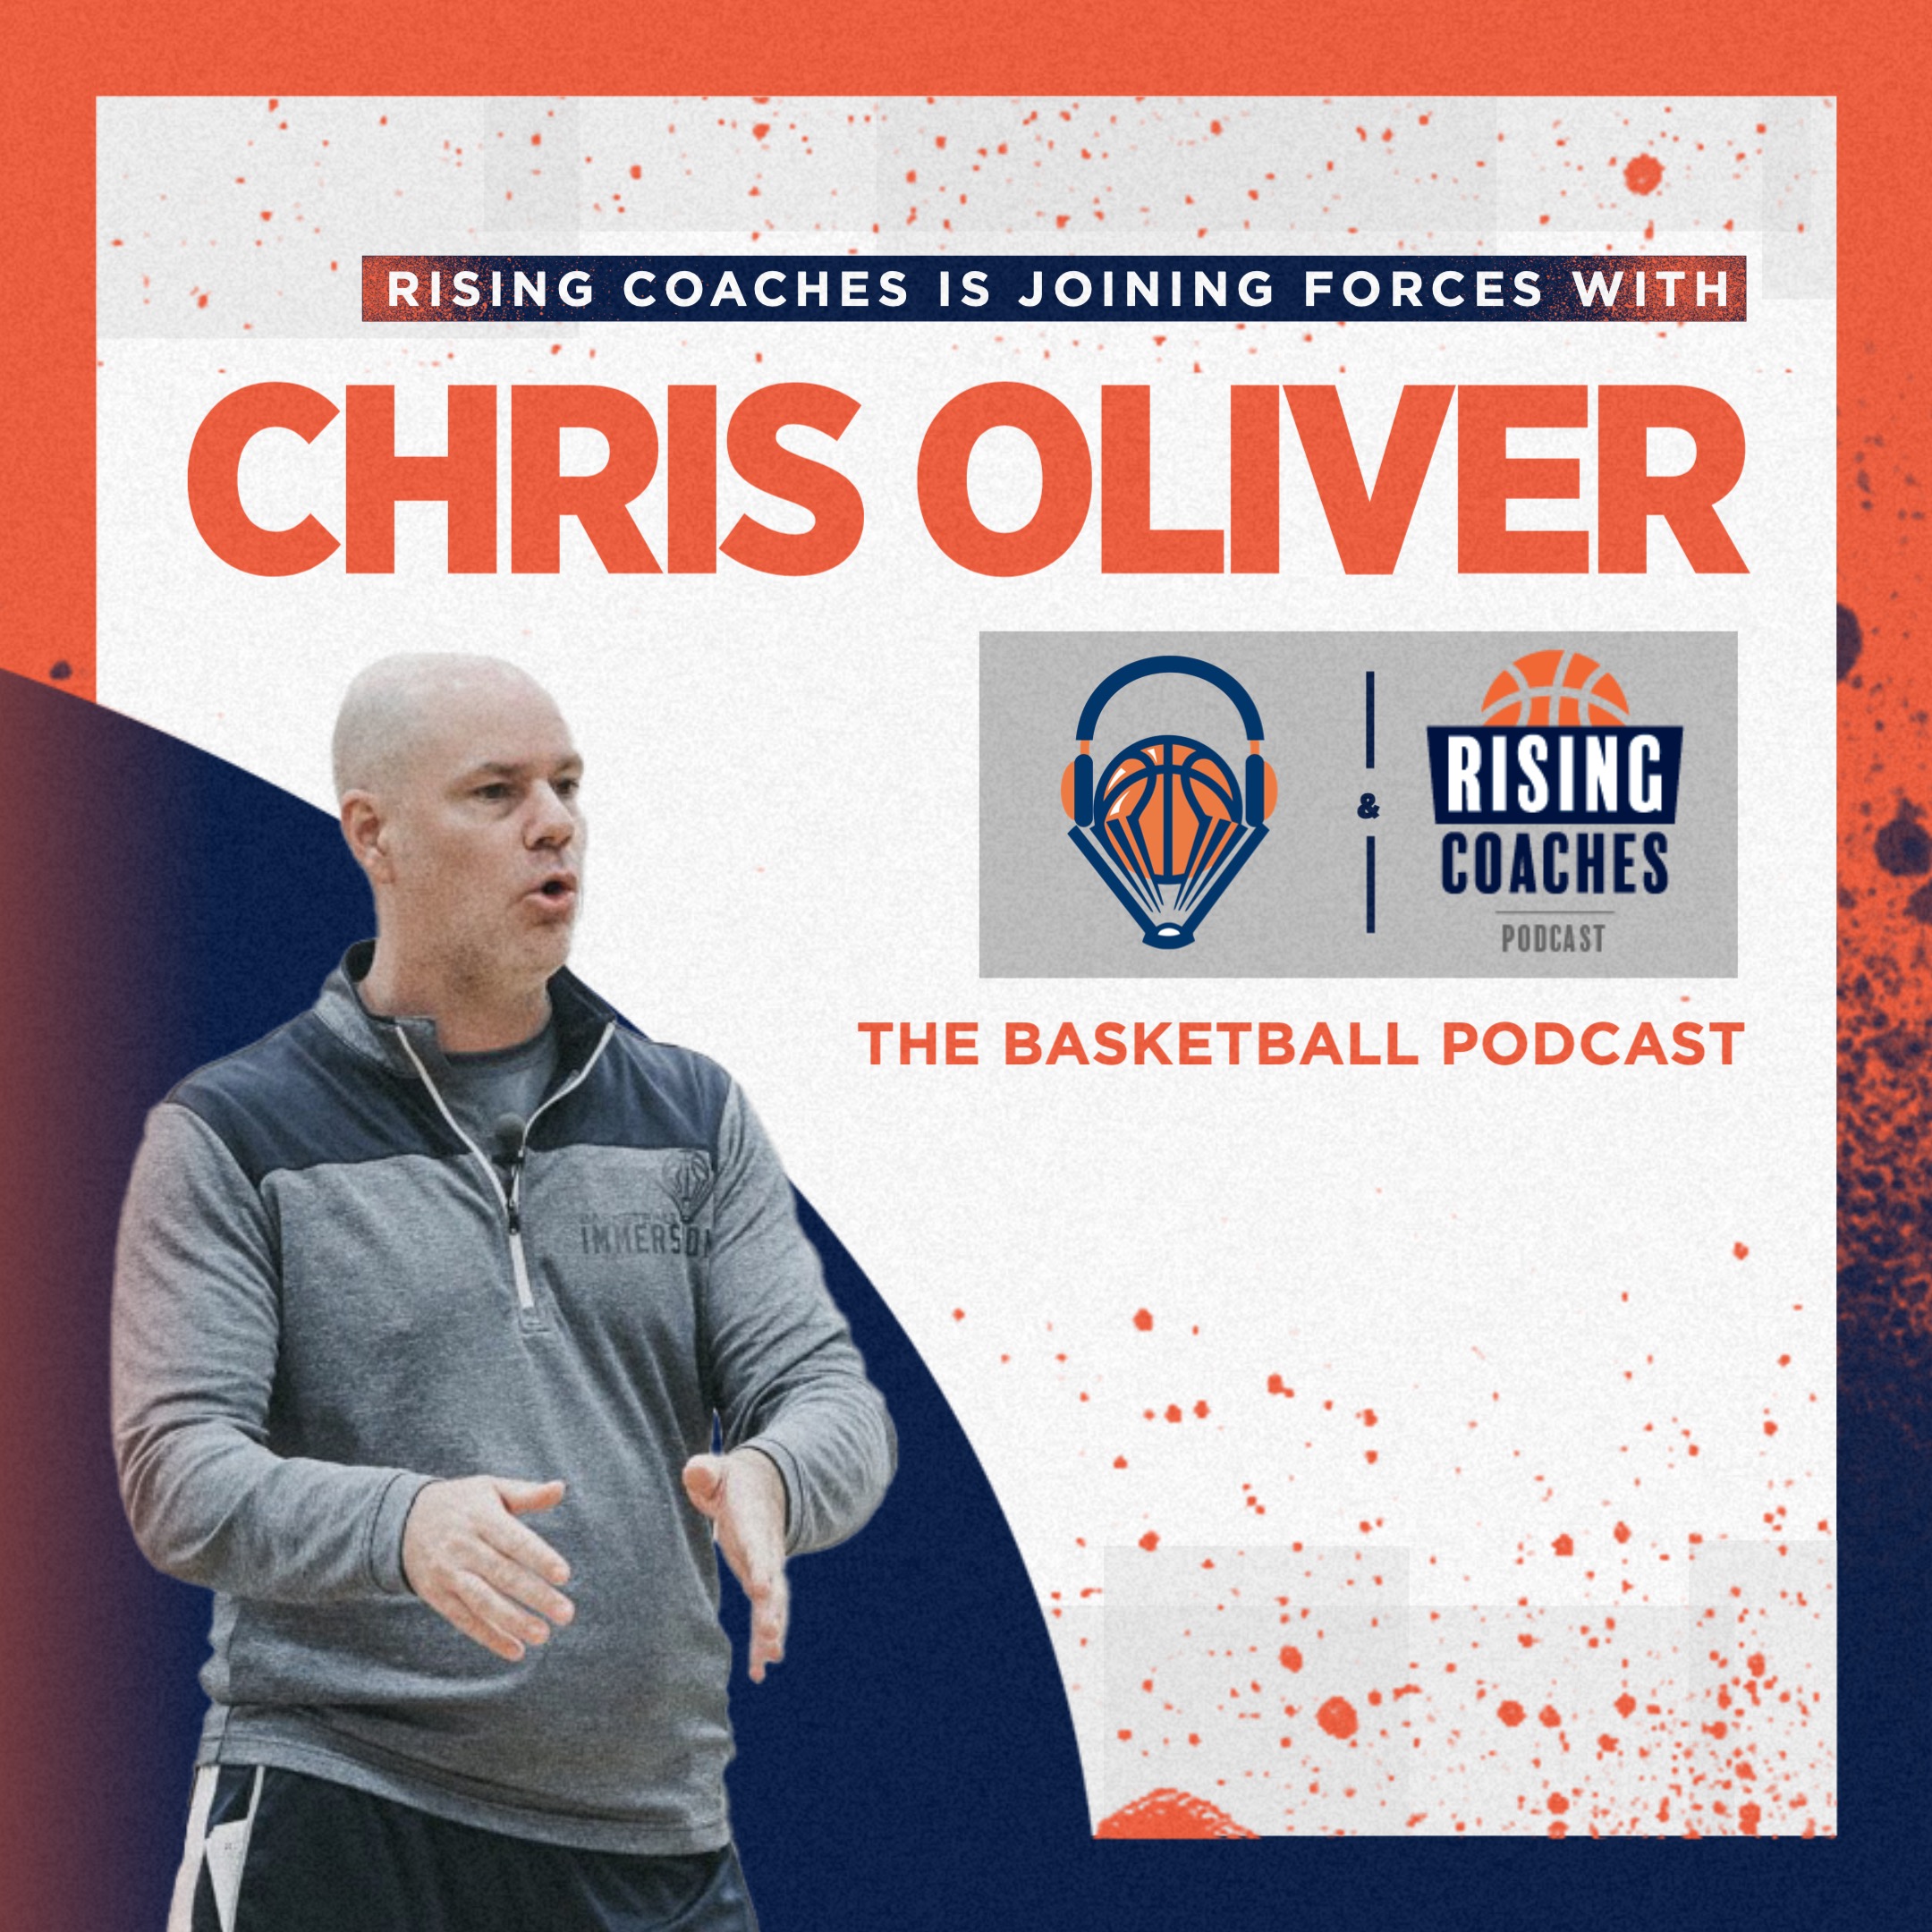 Rising Coaches Partners with The Basketball Podcast with Chris Oliver